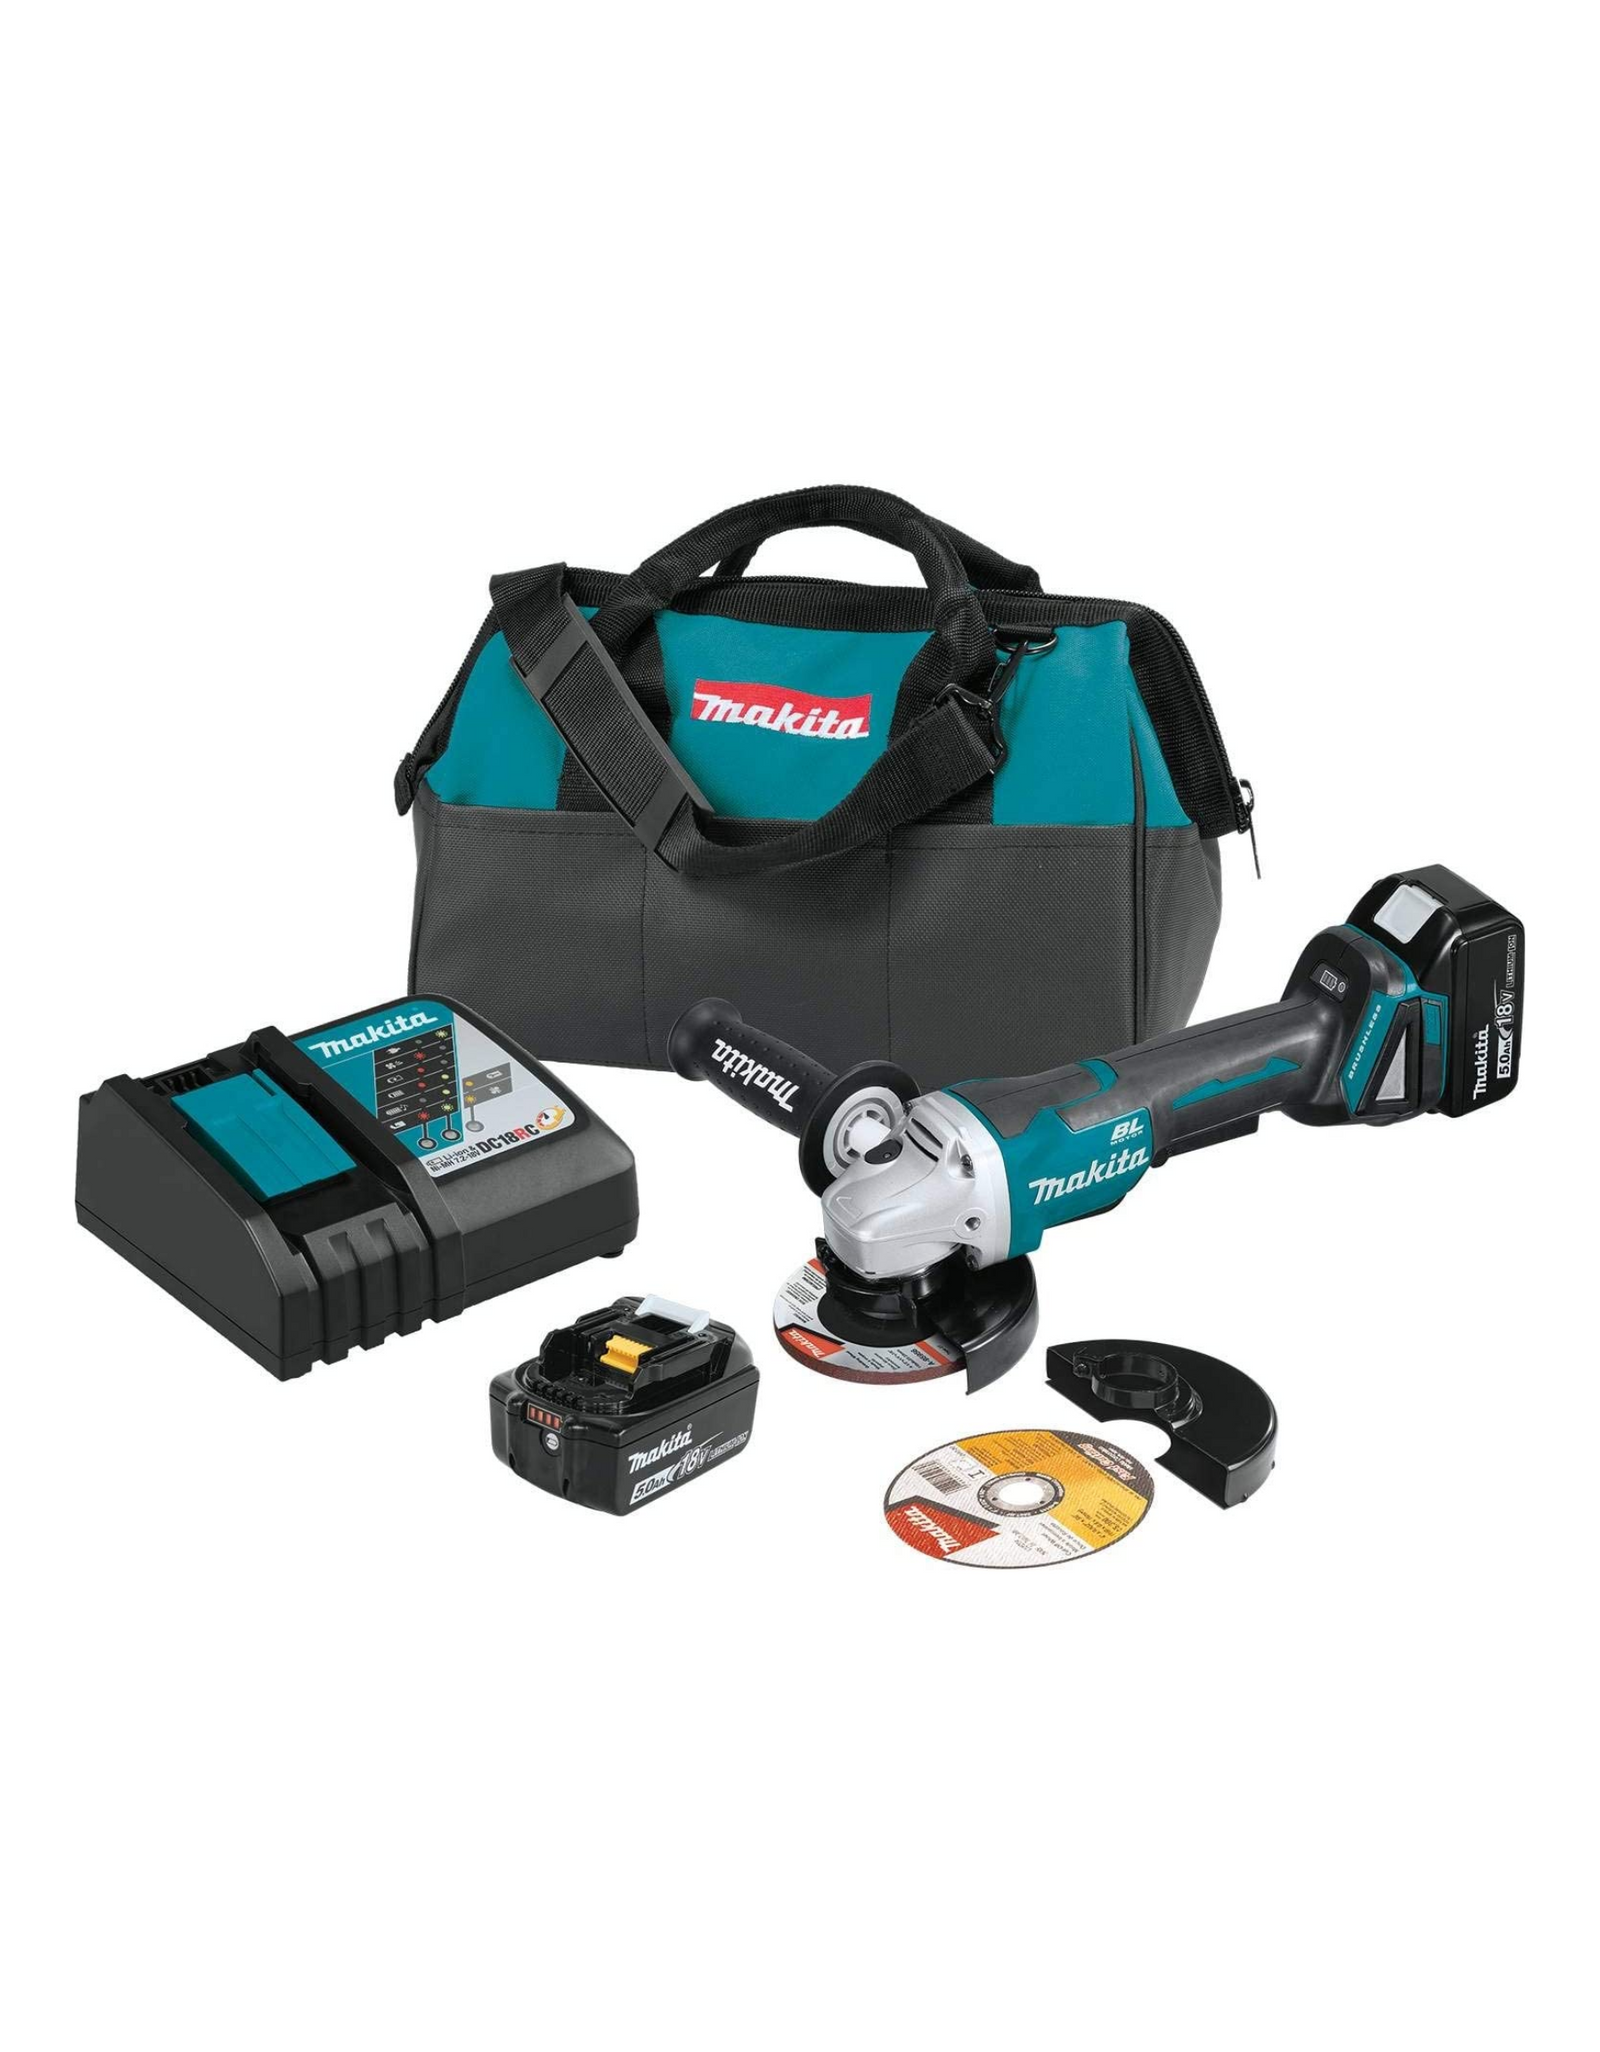 Makita XAG11T 18V LXT Lithium-Ion Brushless Cordless 4-1/2 Inch / 5 Inch Paddle Switch Cut-Off/Angle Grinder Kit, with Electric Brake (5.0Ah)